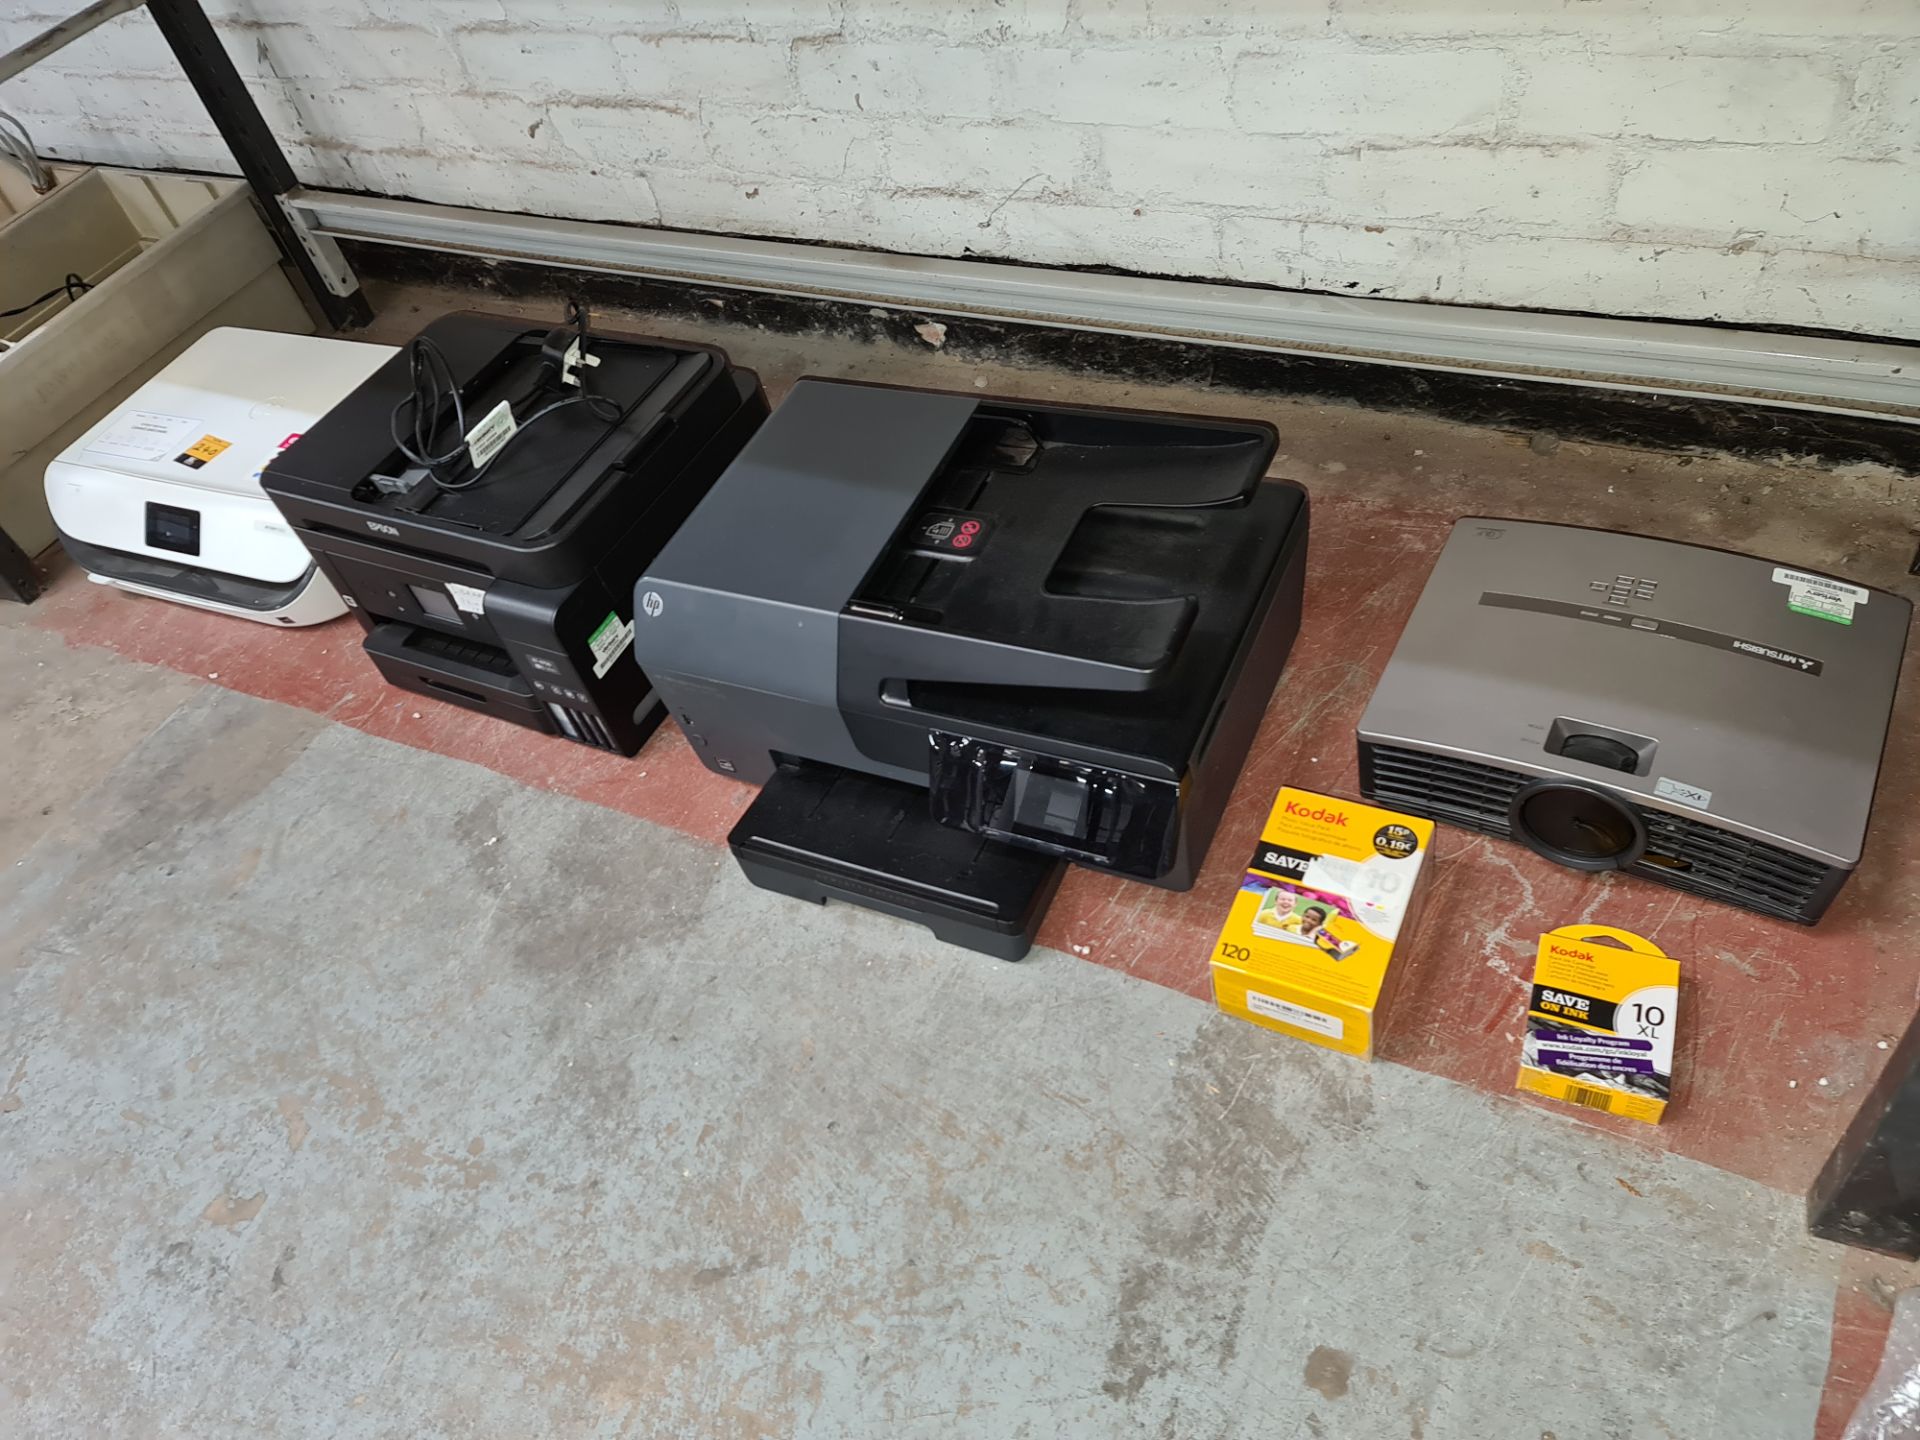 Contents of a bay of printers, plus projector and Kodak ink cartridges - Image 2 of 12